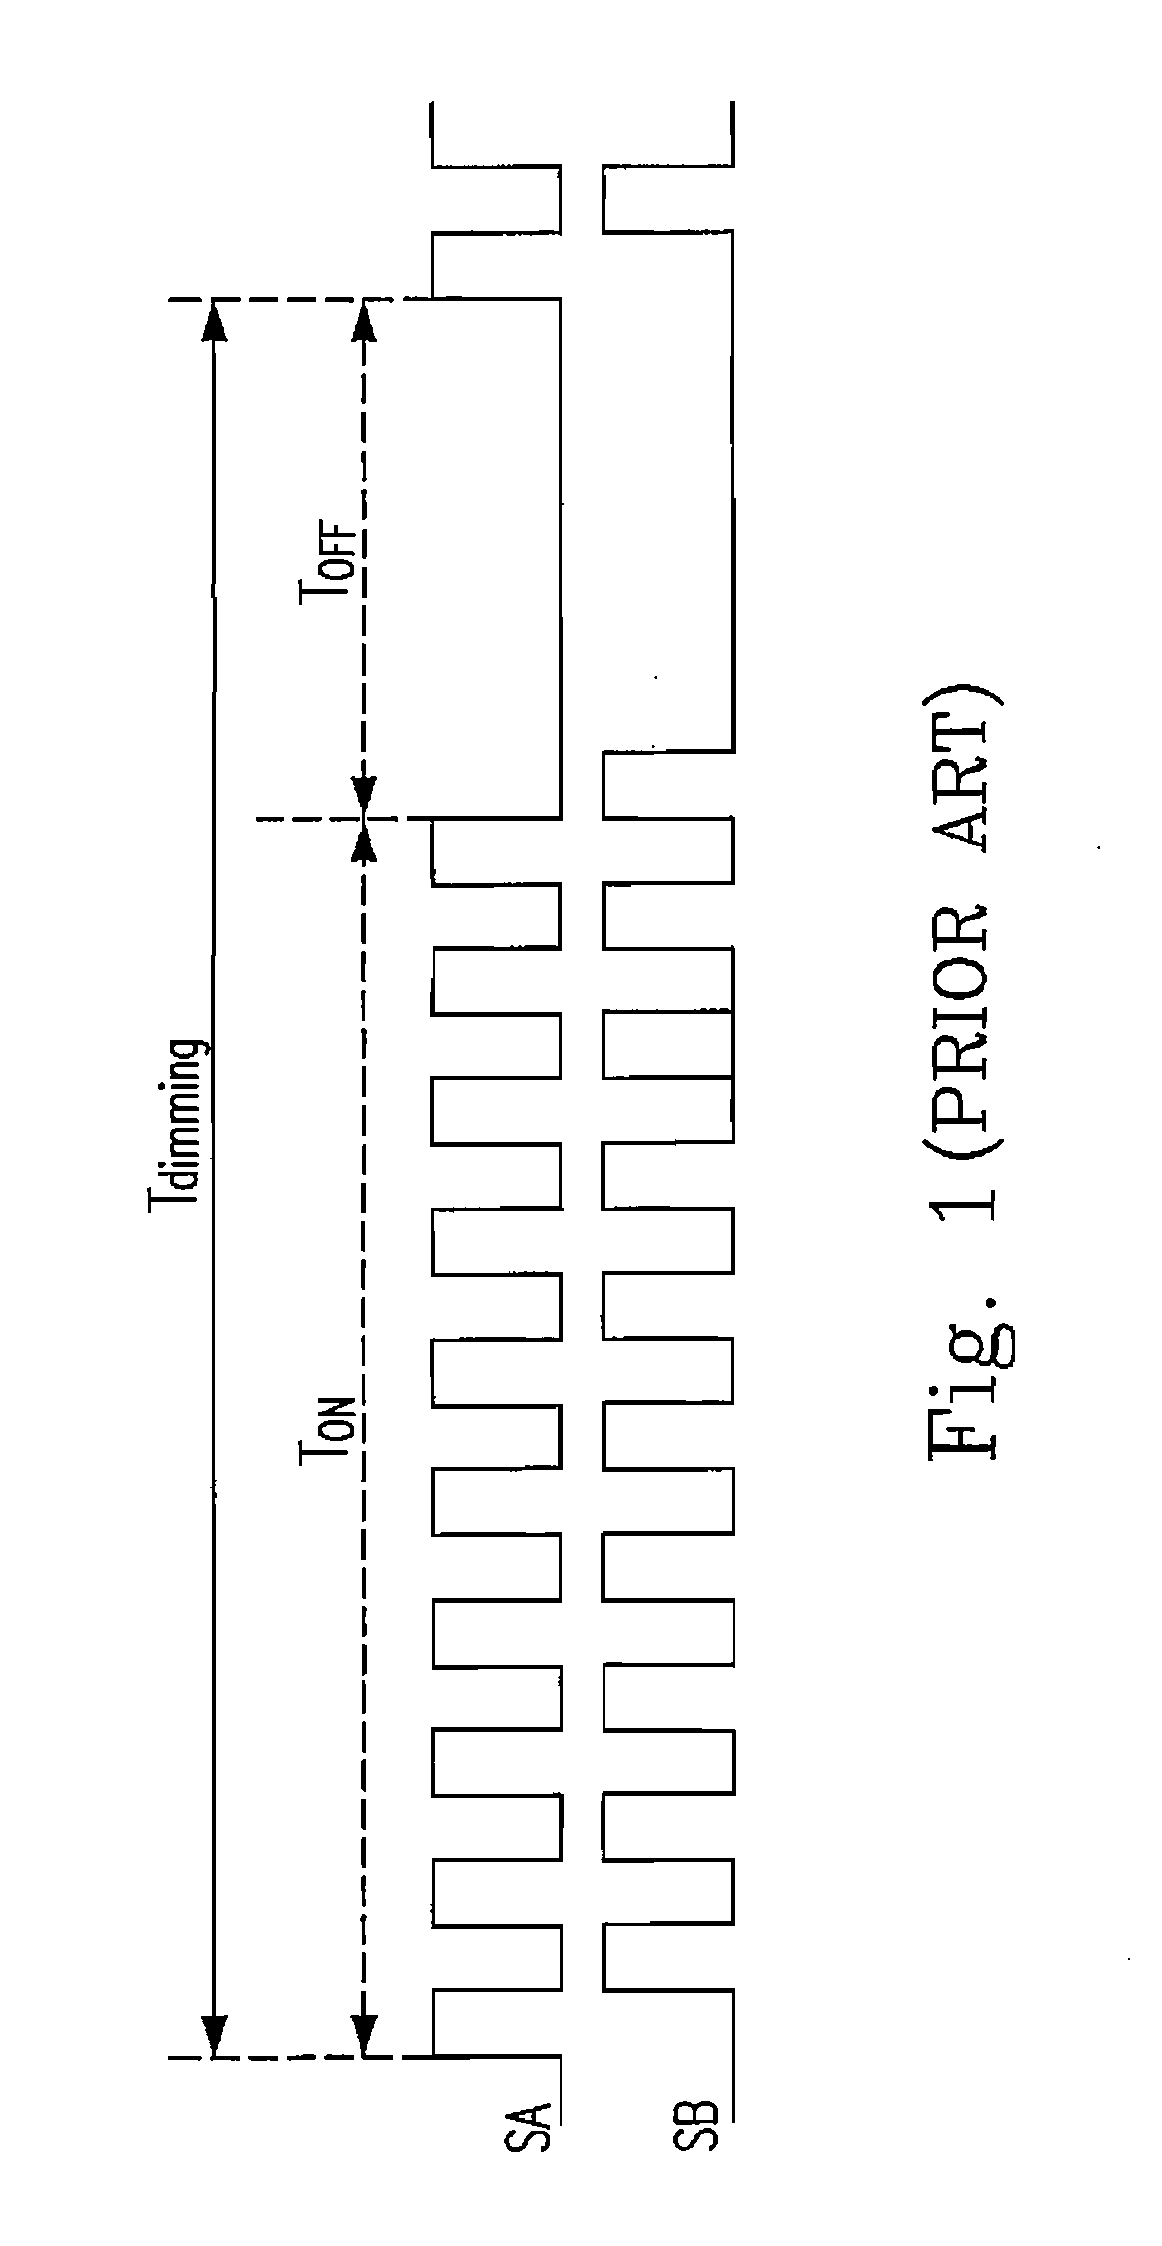 Dielectric barrier discharge lamp system and driving method thereof having relatively better performance in startup and re-startup of dimming